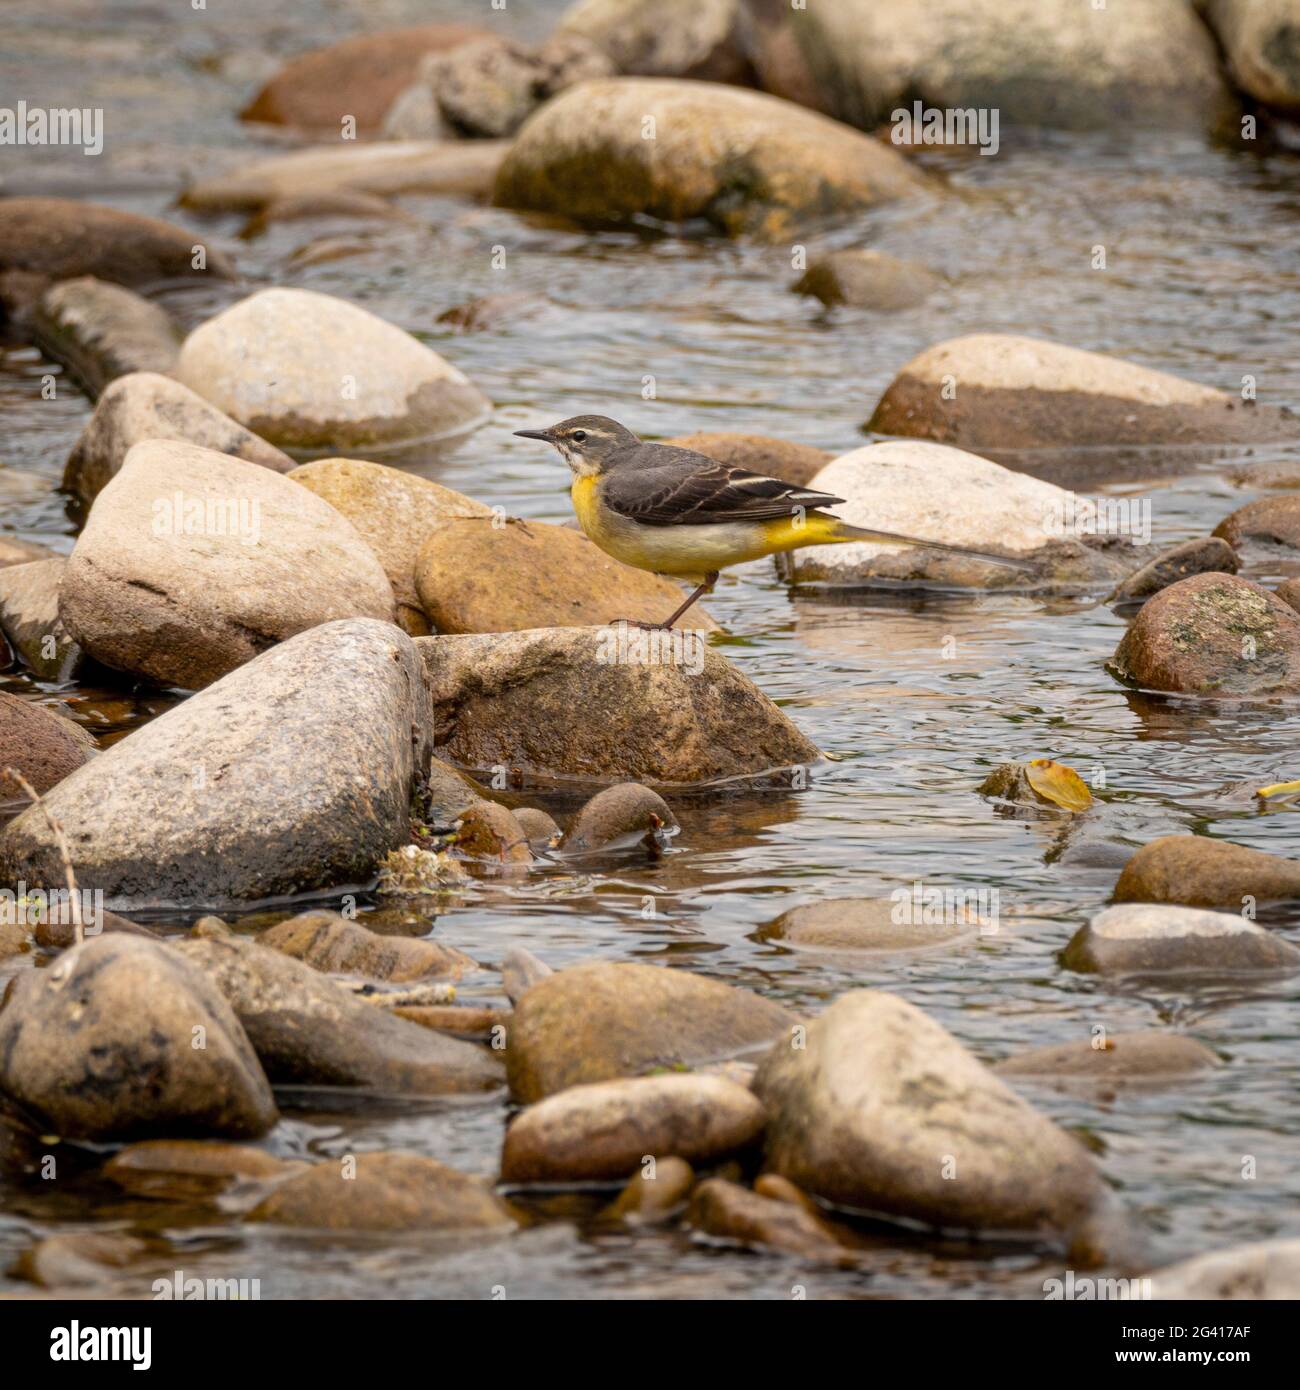 Female Grey Wagtail bird on stones in river Stock Photo